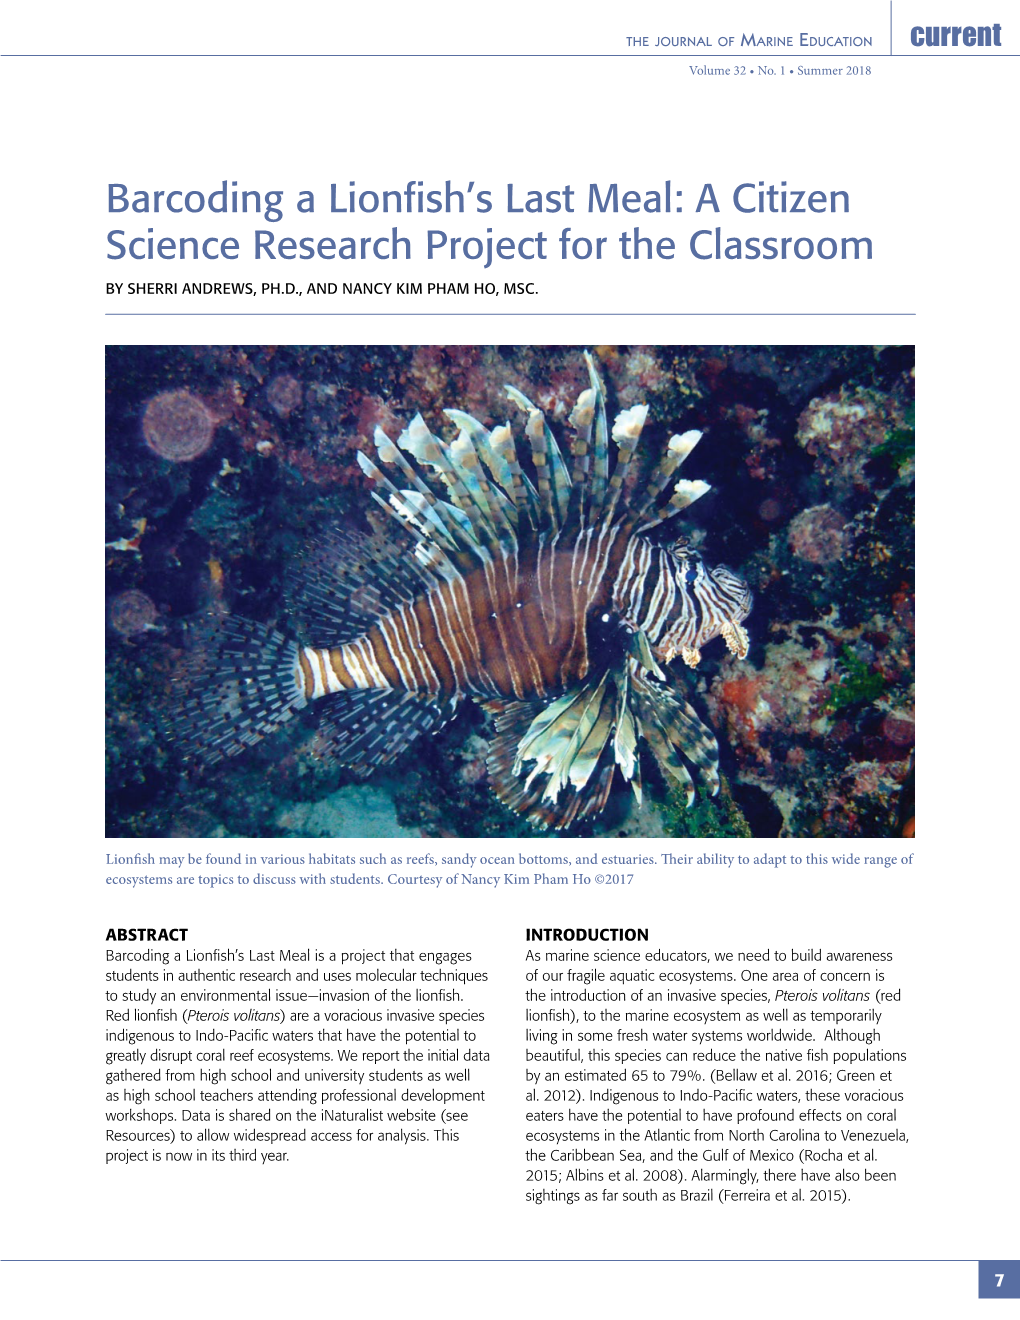 Barcoding a Lionfish's Last Meal: a Citizen Science Research Project for the Classroom